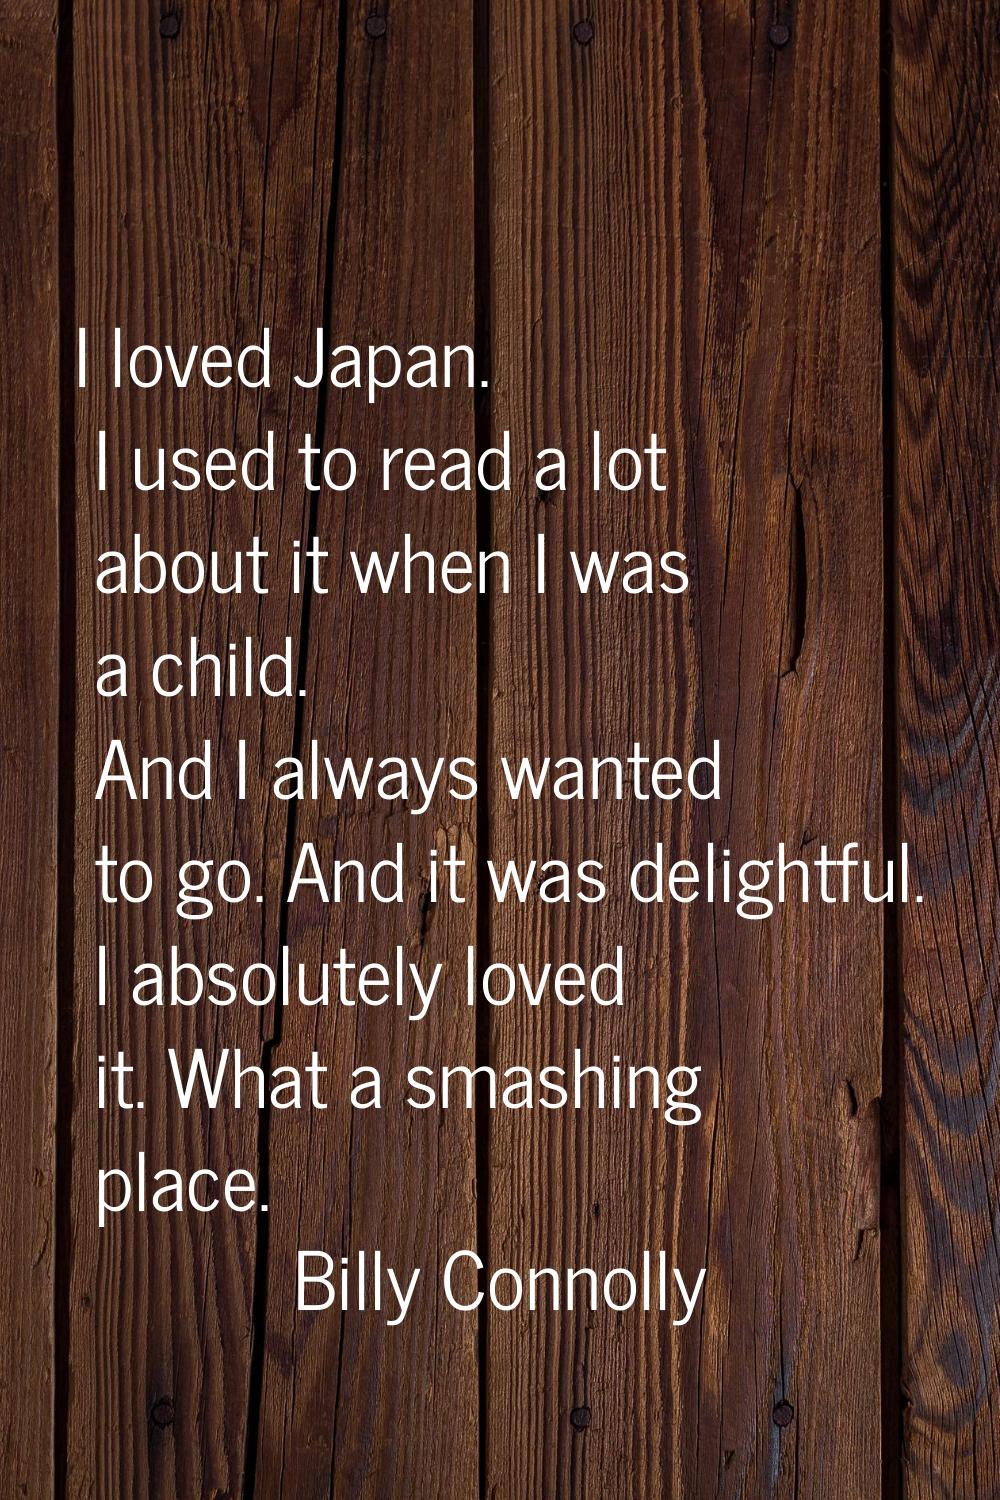 I loved Japan. I used to read a lot about it when I was a child. And I always wanted to go. And it 